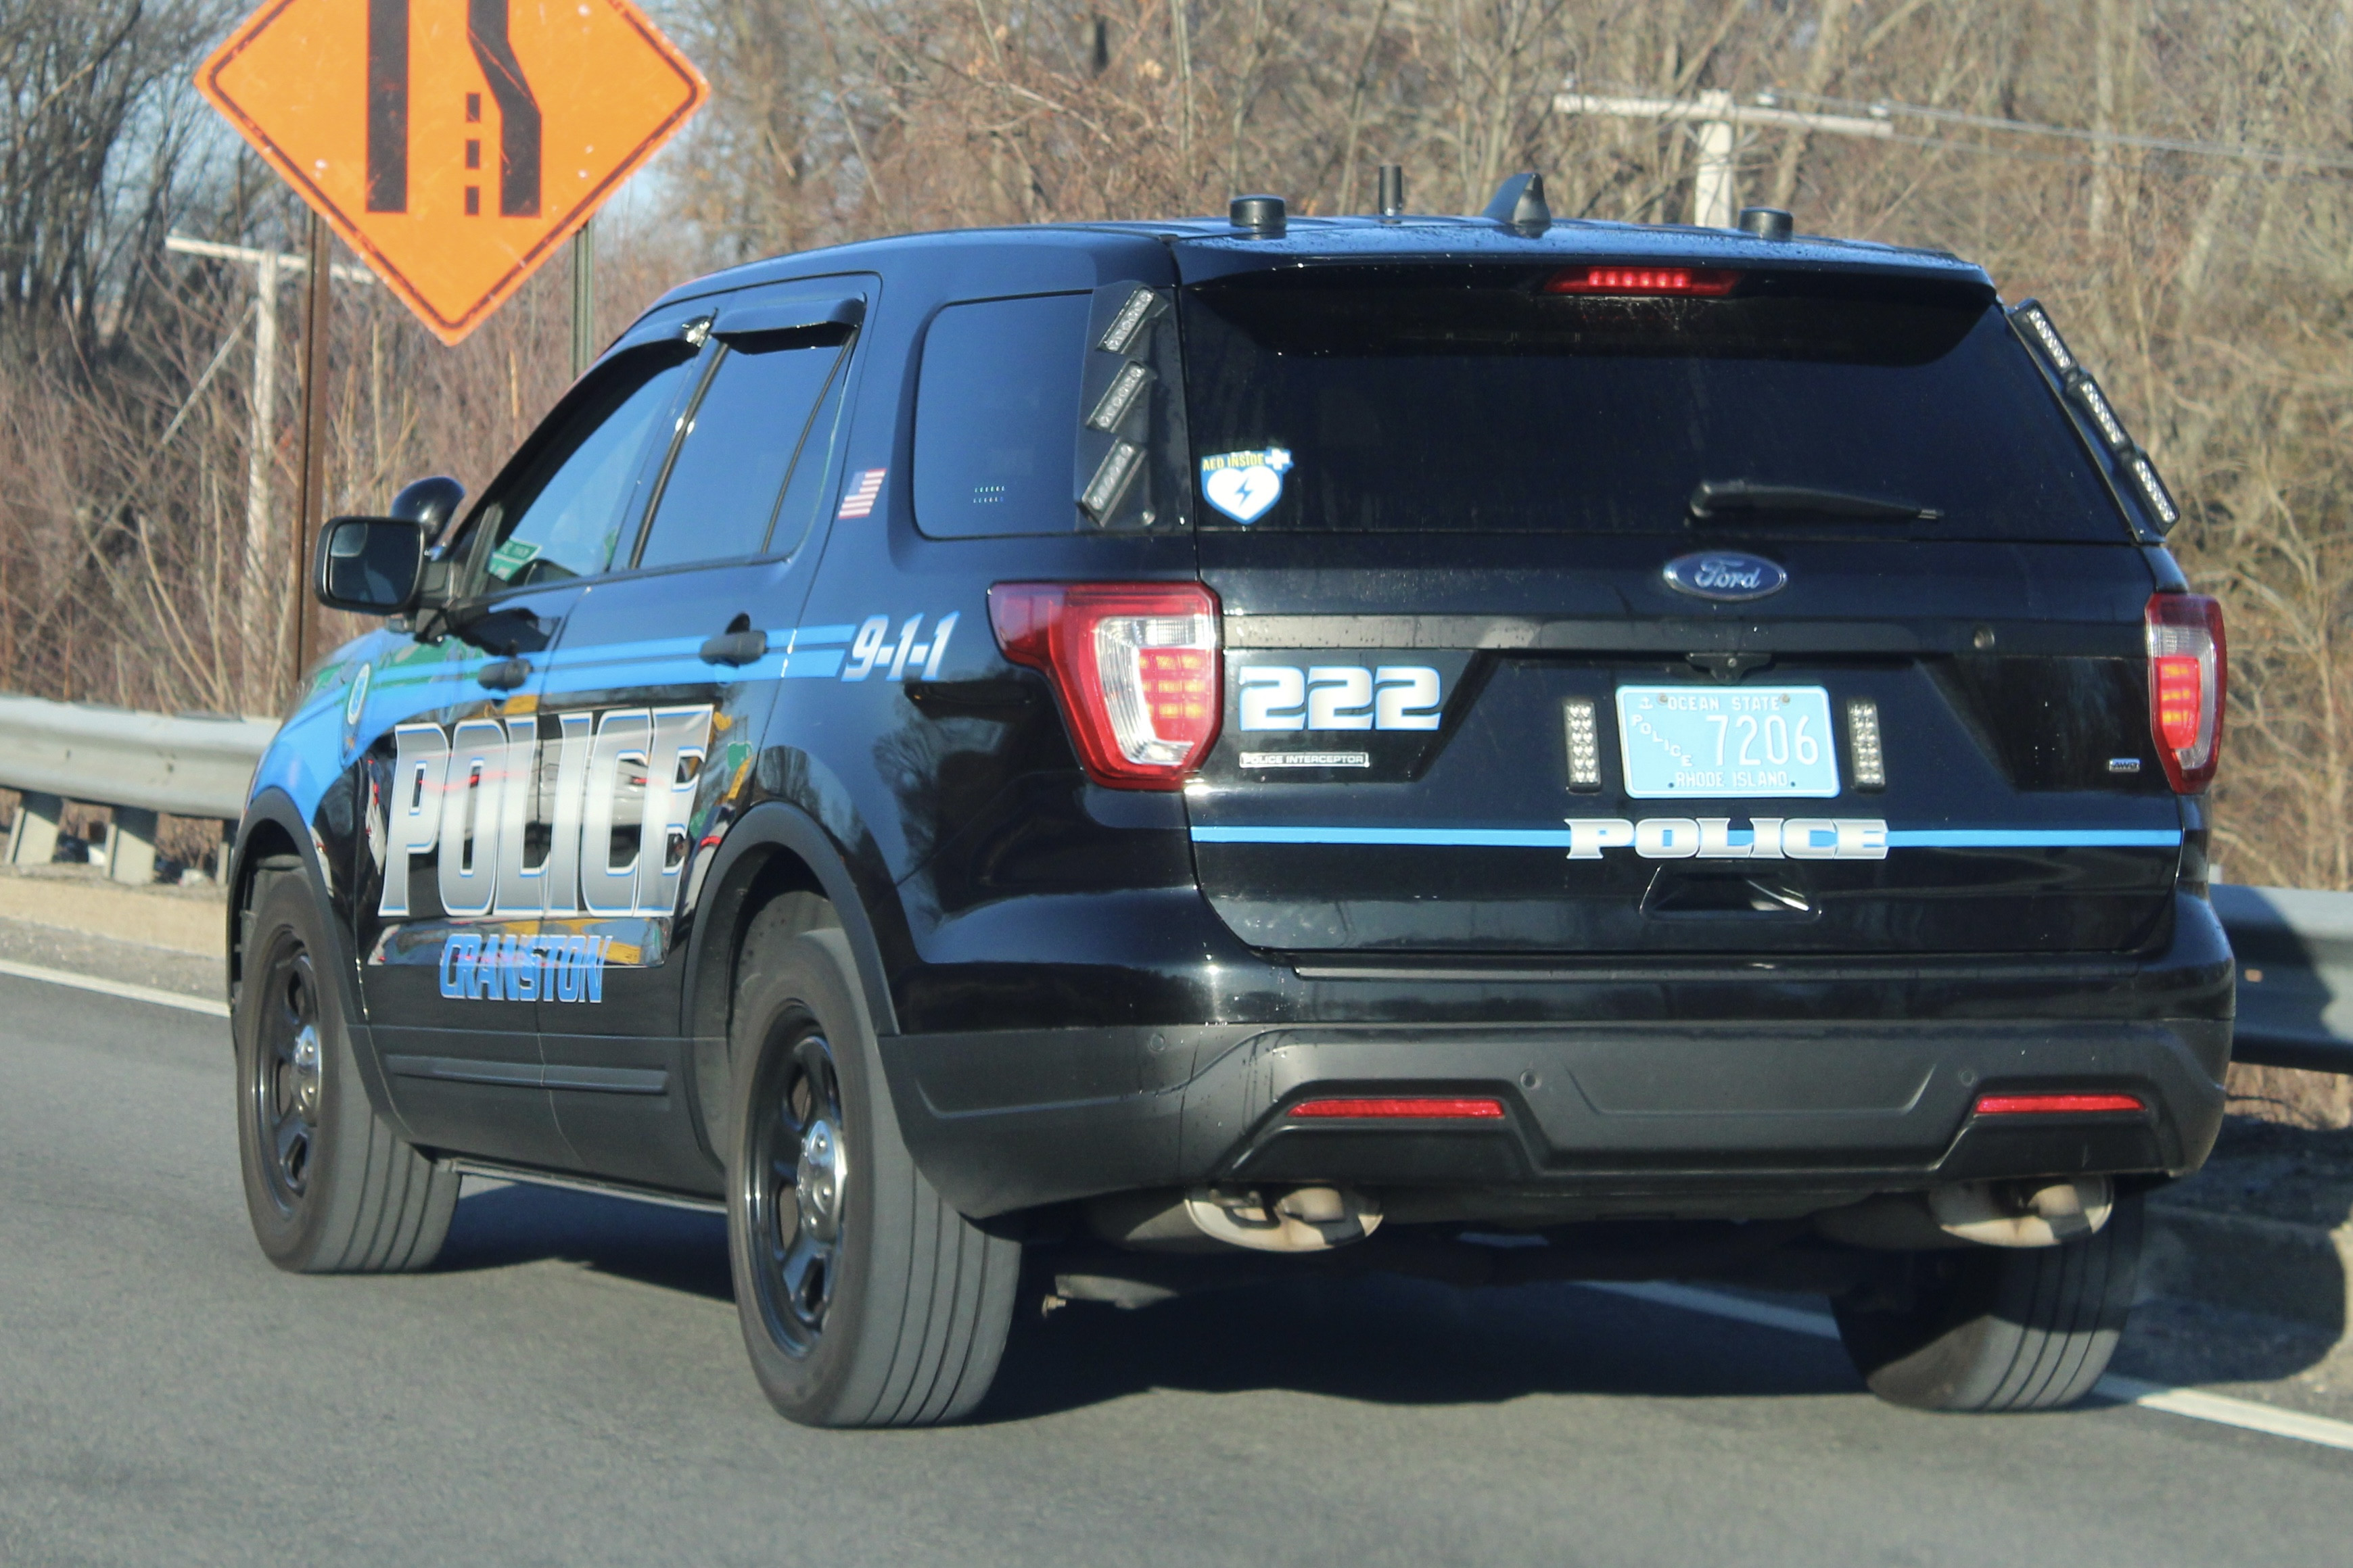 A photo  of Cranston Police
            Cruiser 222, a 2019 Ford Police Interceptor Utility             taken by @riemergencyvehicles